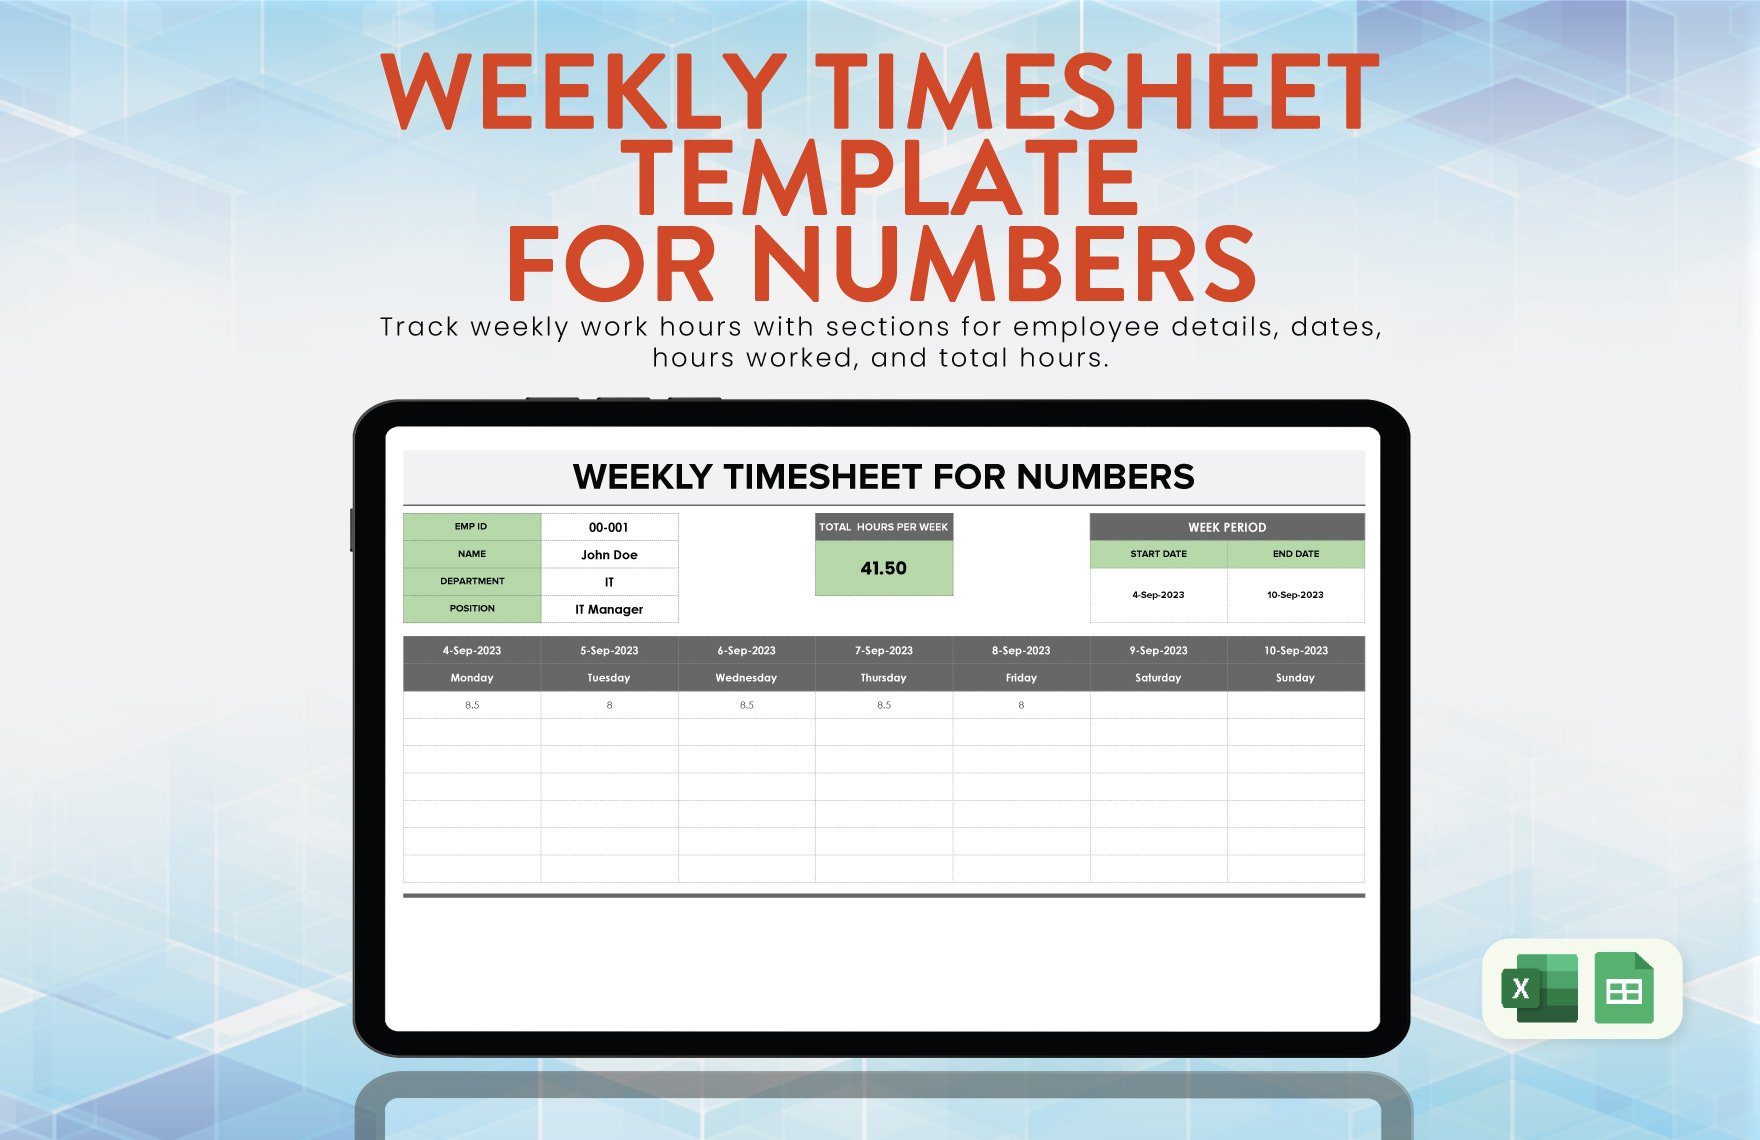 Weekly Timesheet Template For Numbers in Excel, Google Sheets